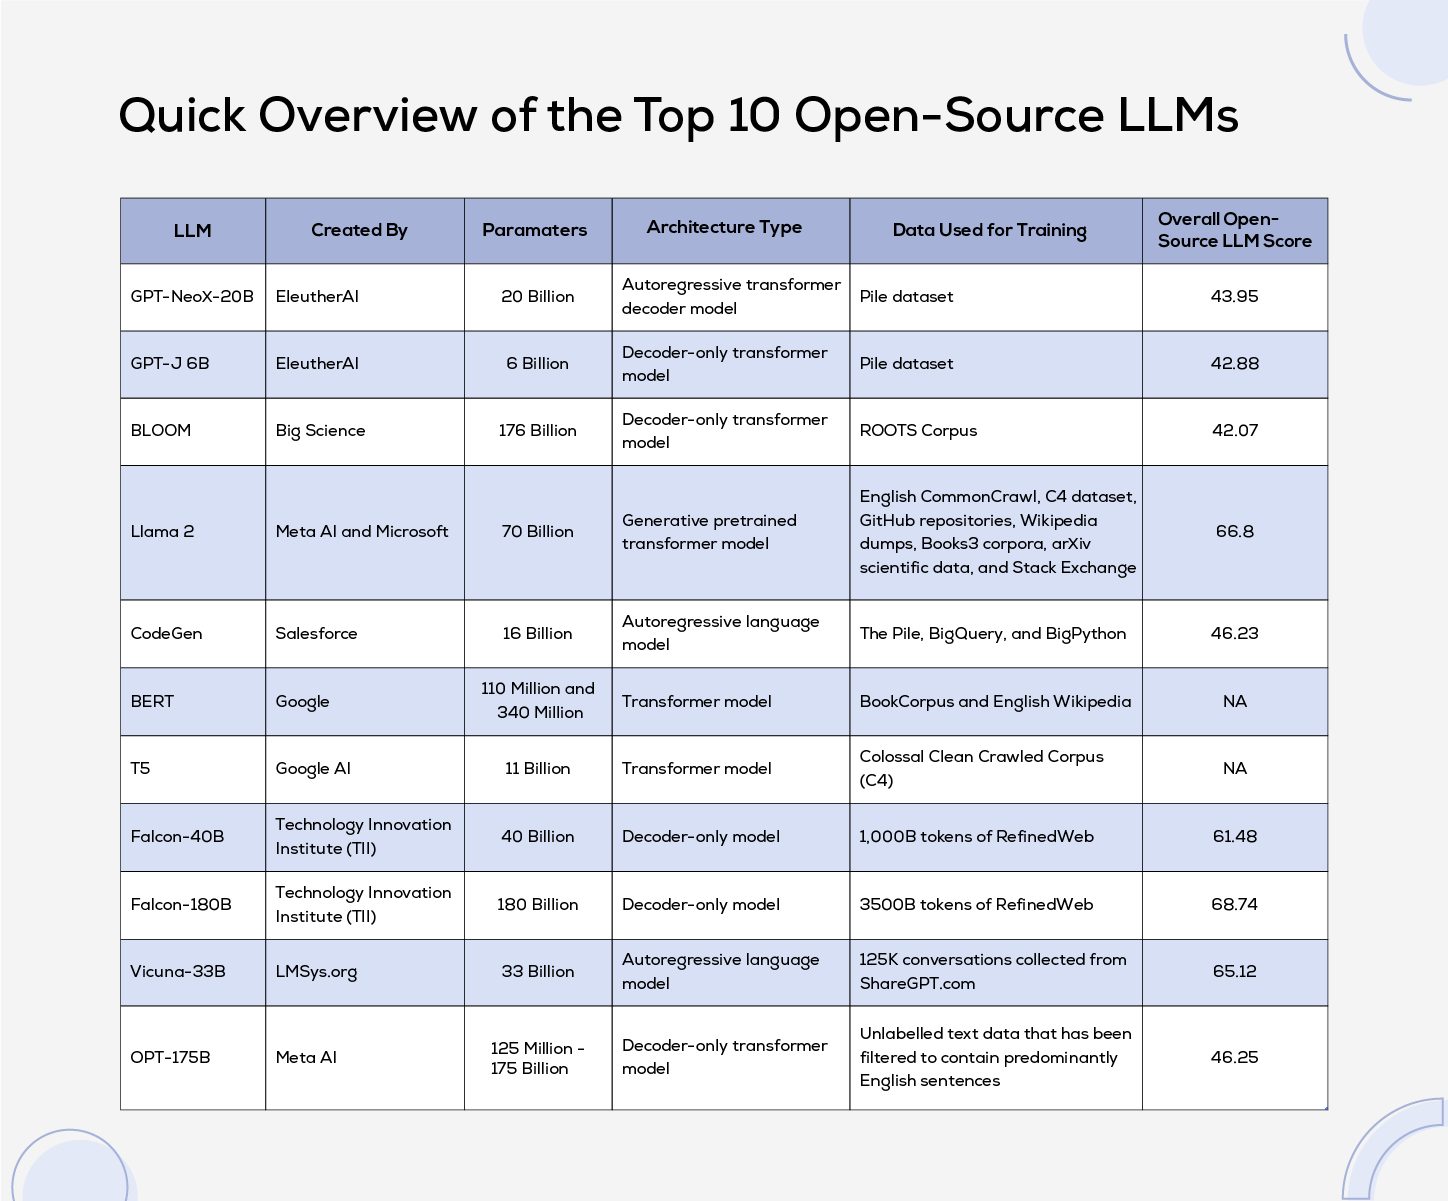 Quick Overview of the Top 10 Open-Source LLMs